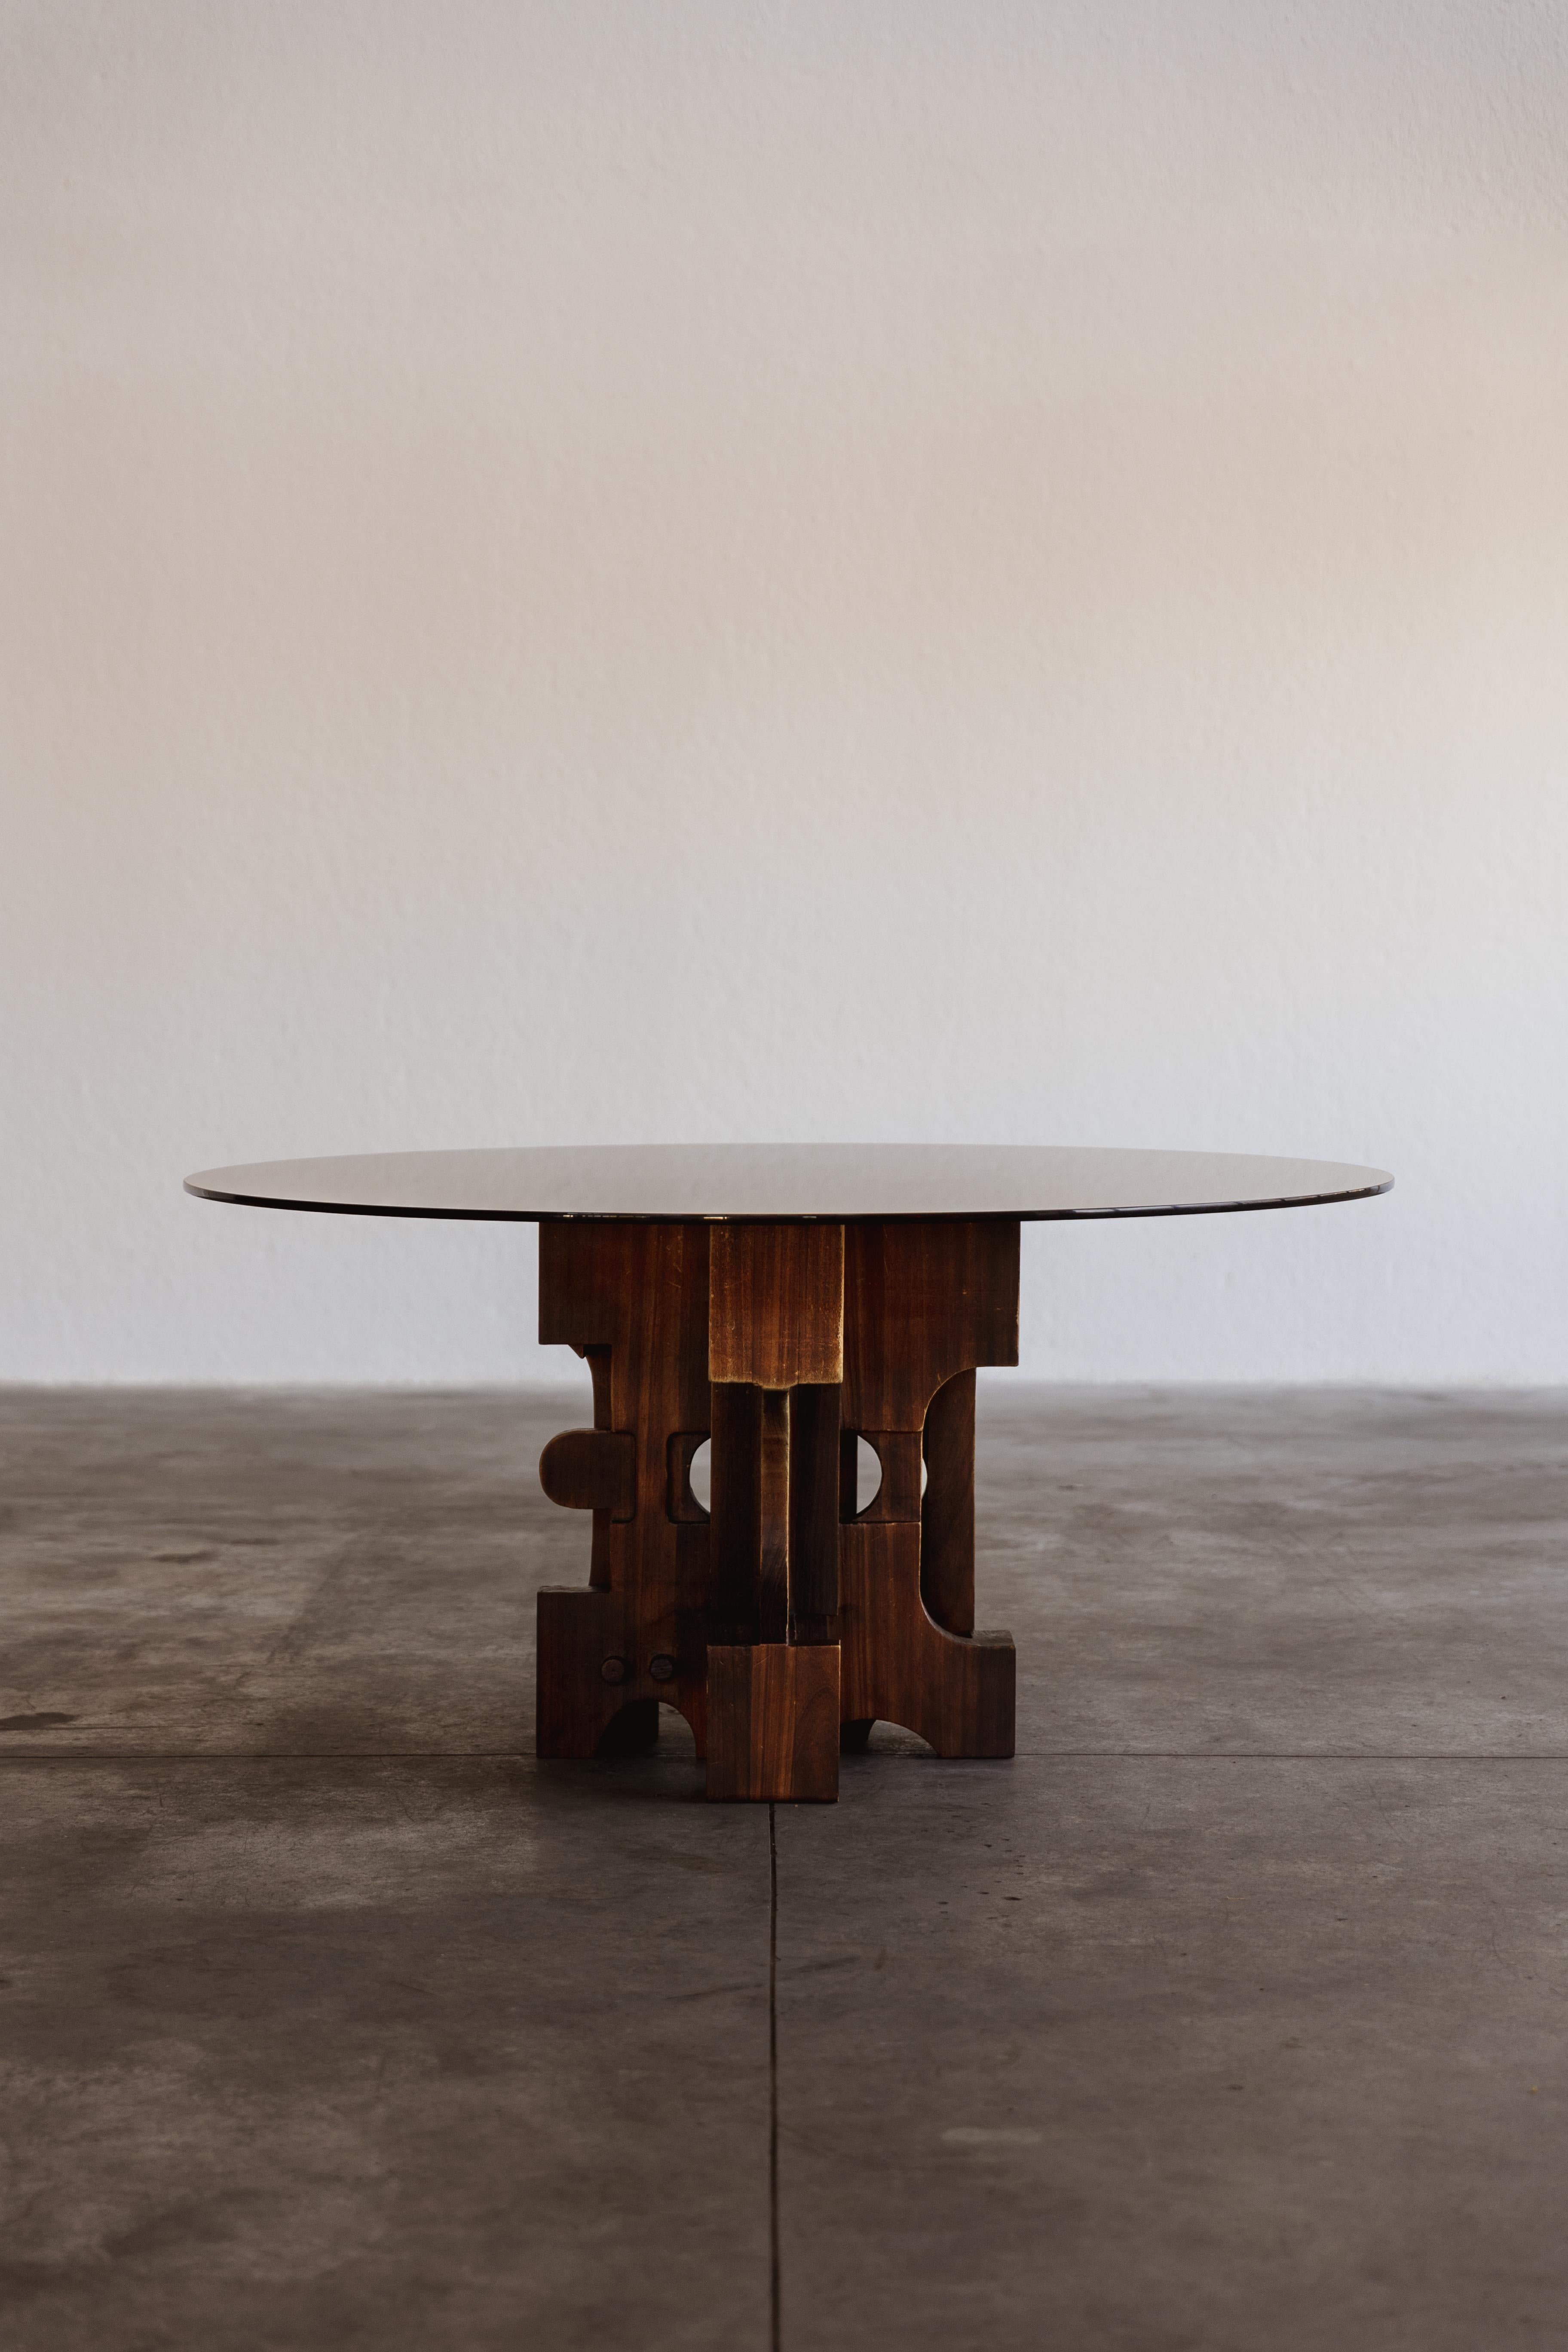 Nerone & Patuzzi Dining Table for Gruppo NP2, 1970s For Sale 4